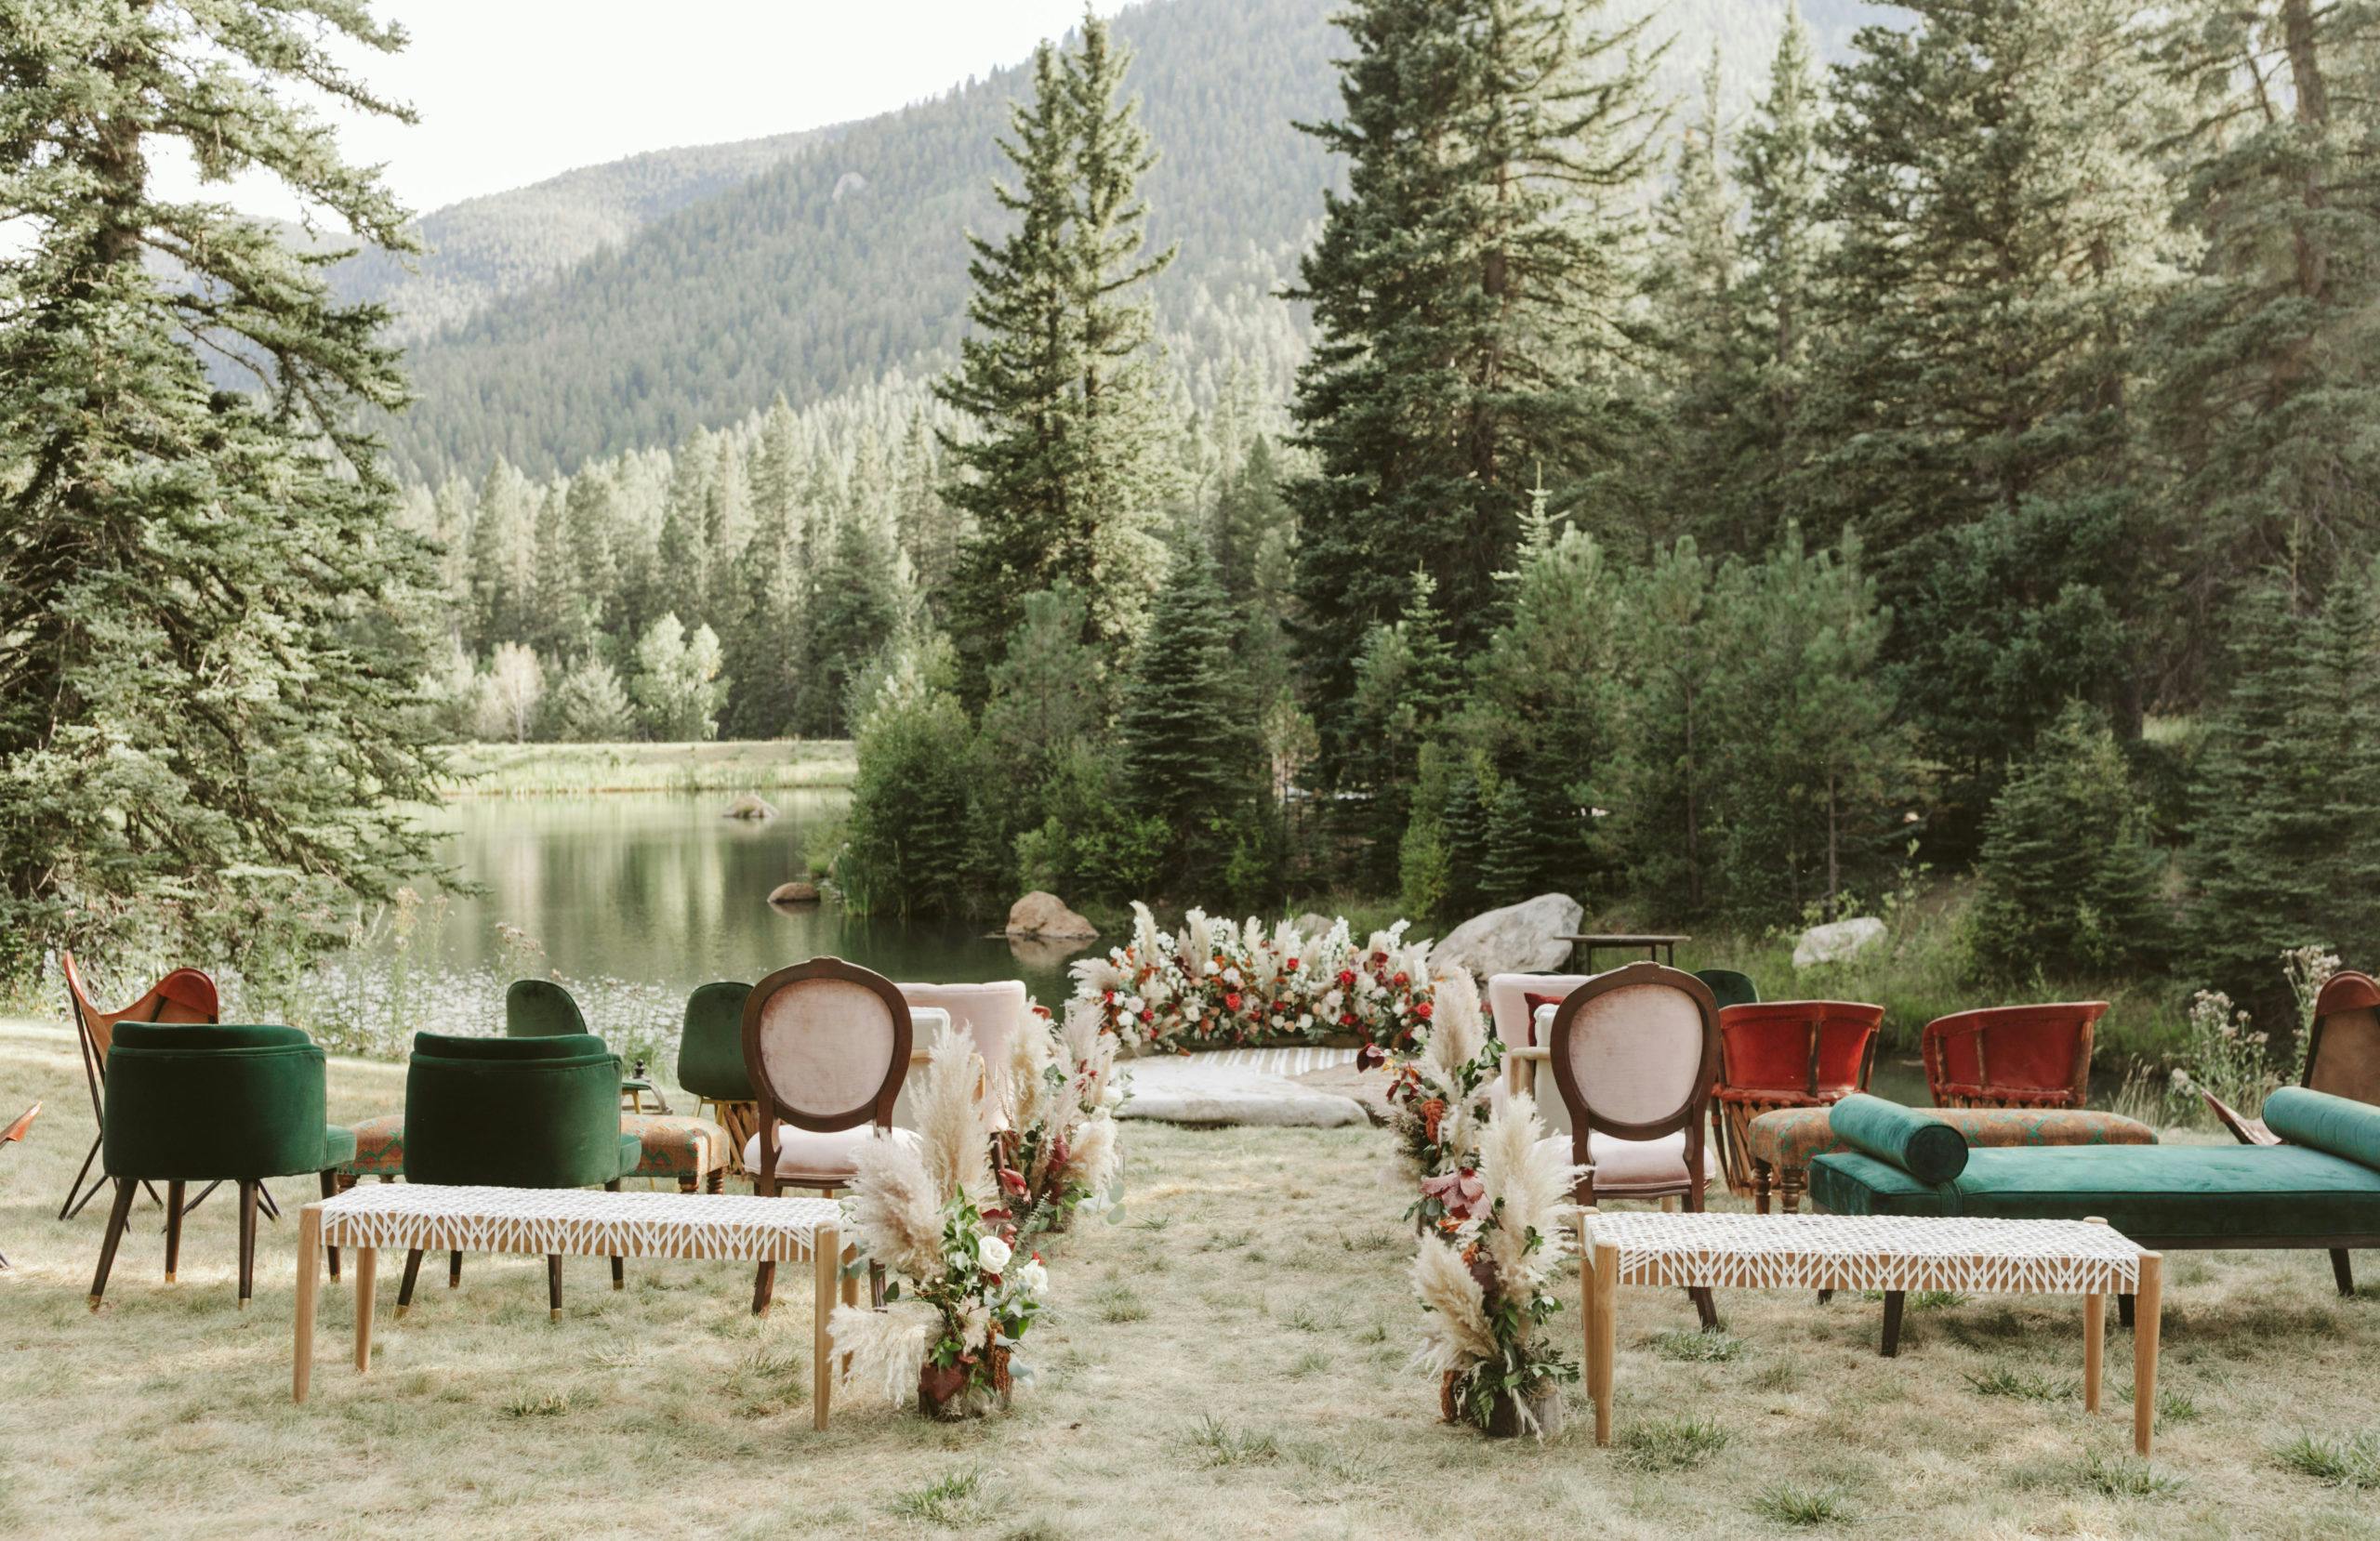 A fall wedding ceremony filled with eclectic velvet furniture in a forest setting | PartySlate